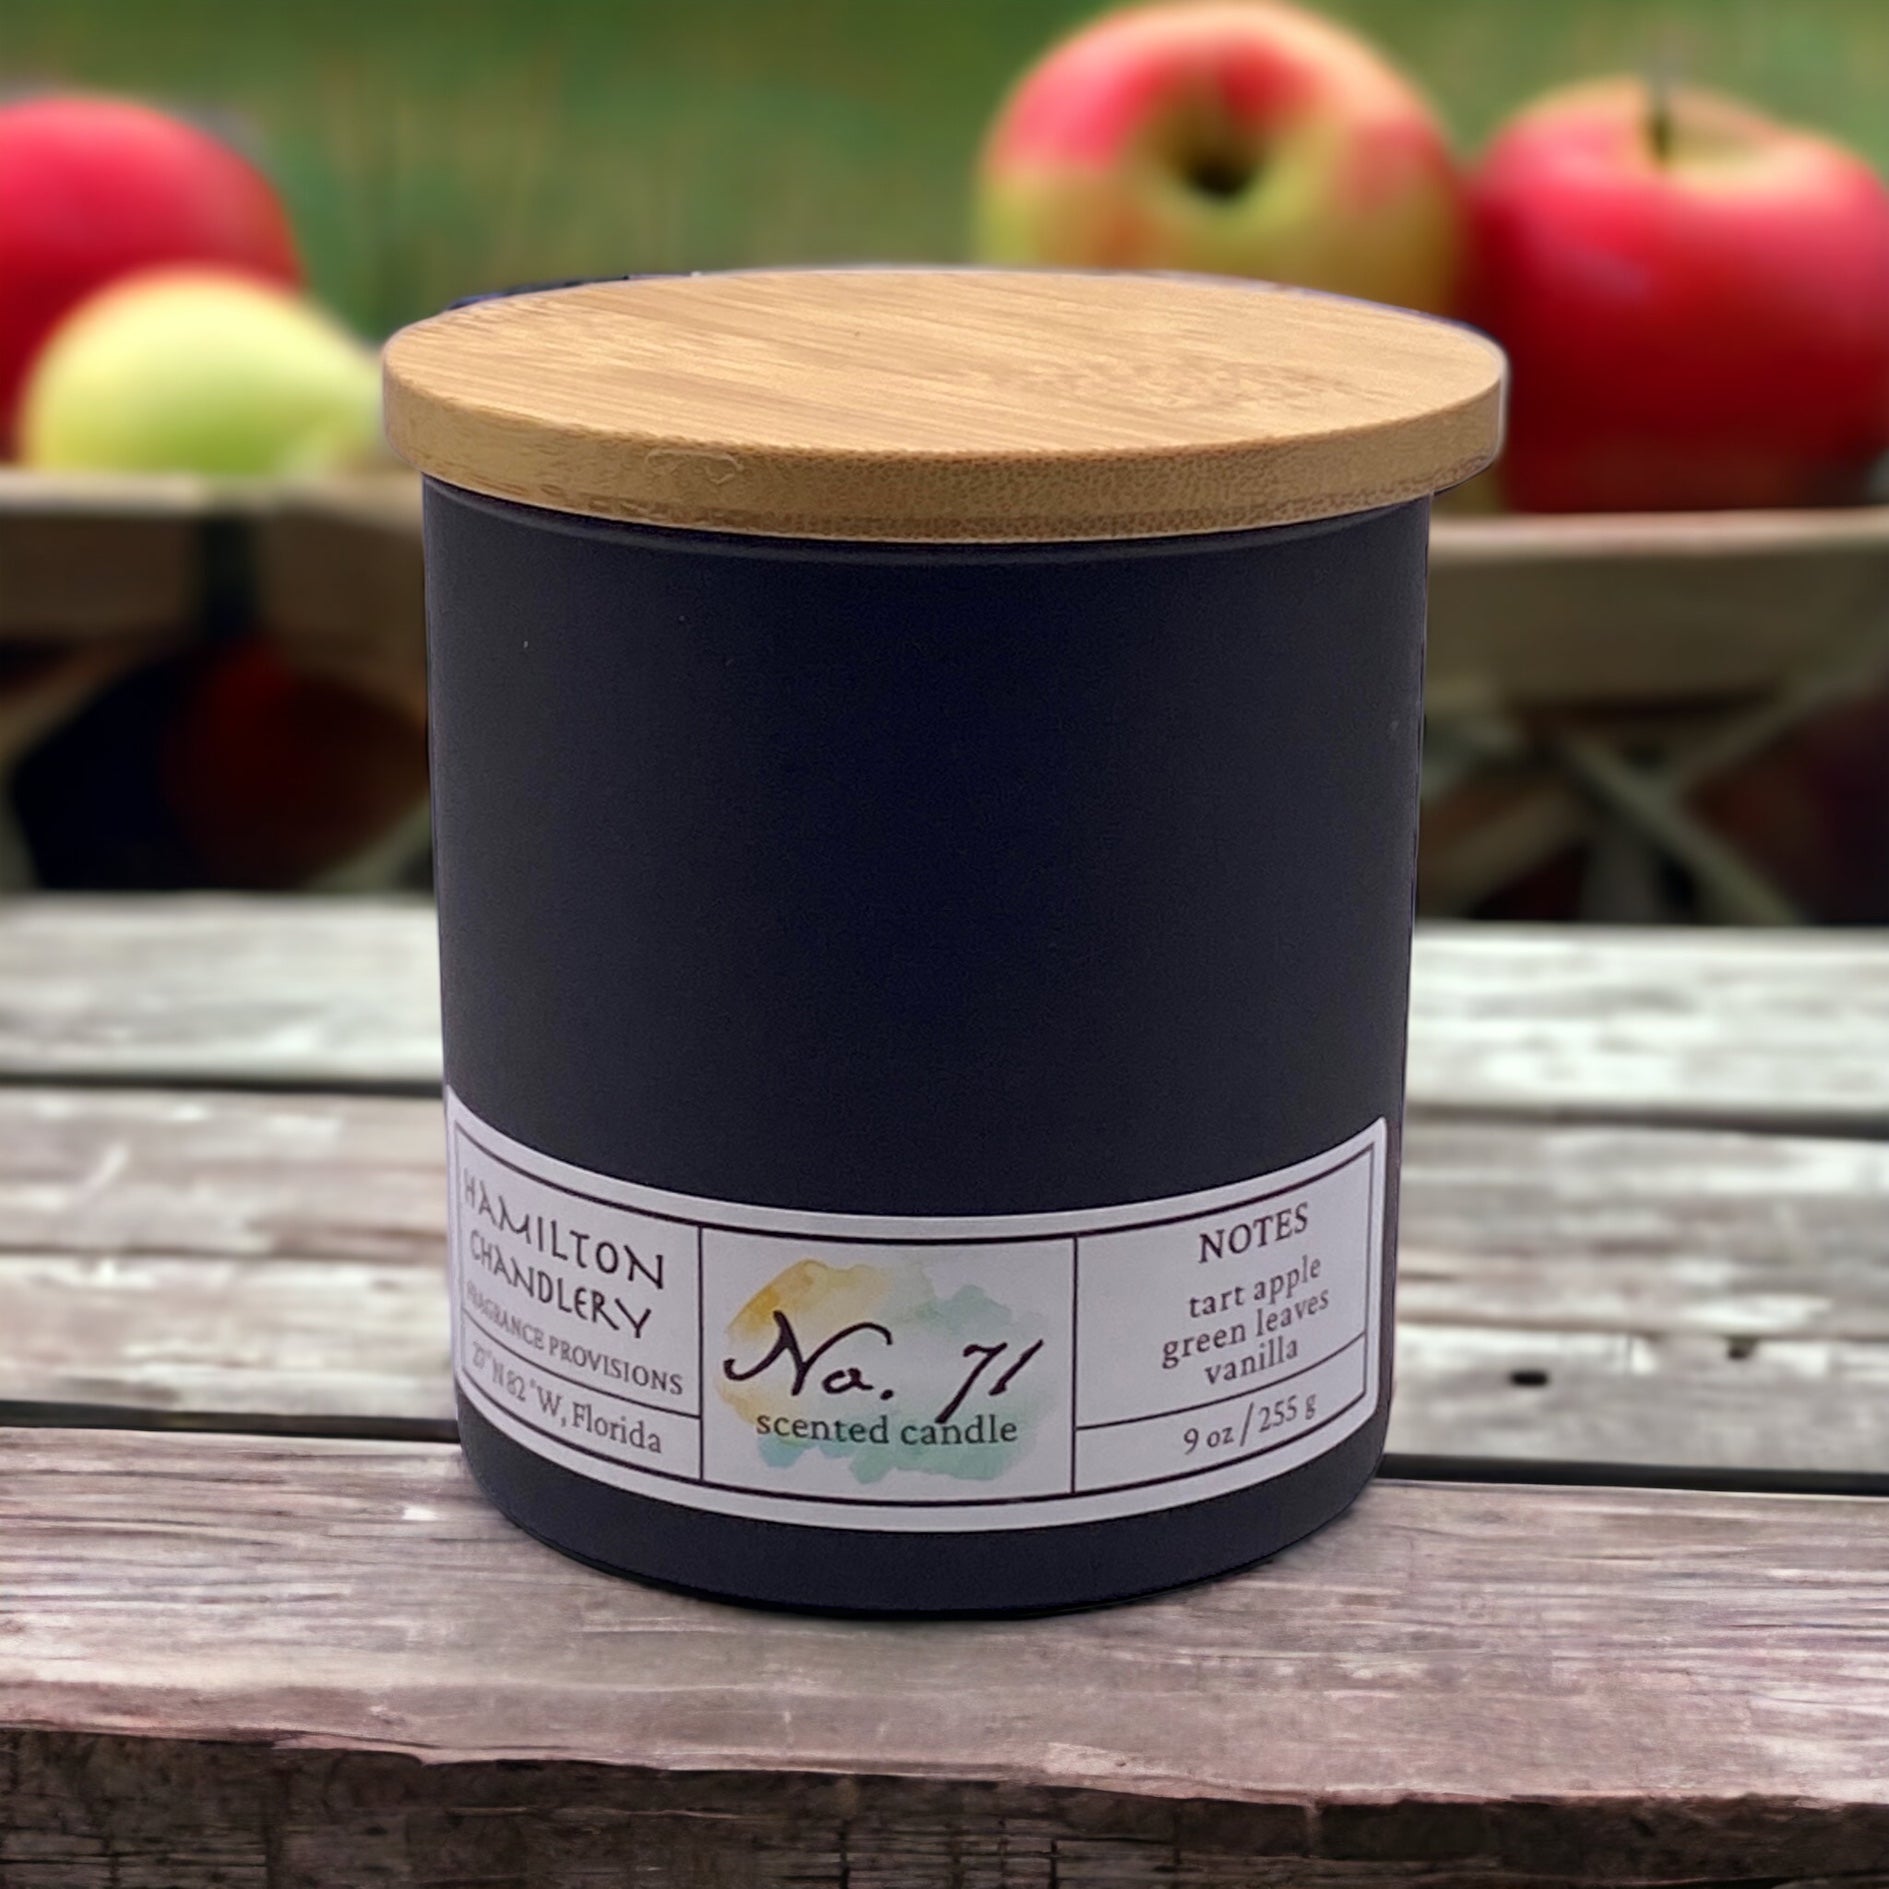 Fragrance No. 71 Minimalistic Candle on Wooden Table with Fresh Picked Apples | Hamilton Chandlery